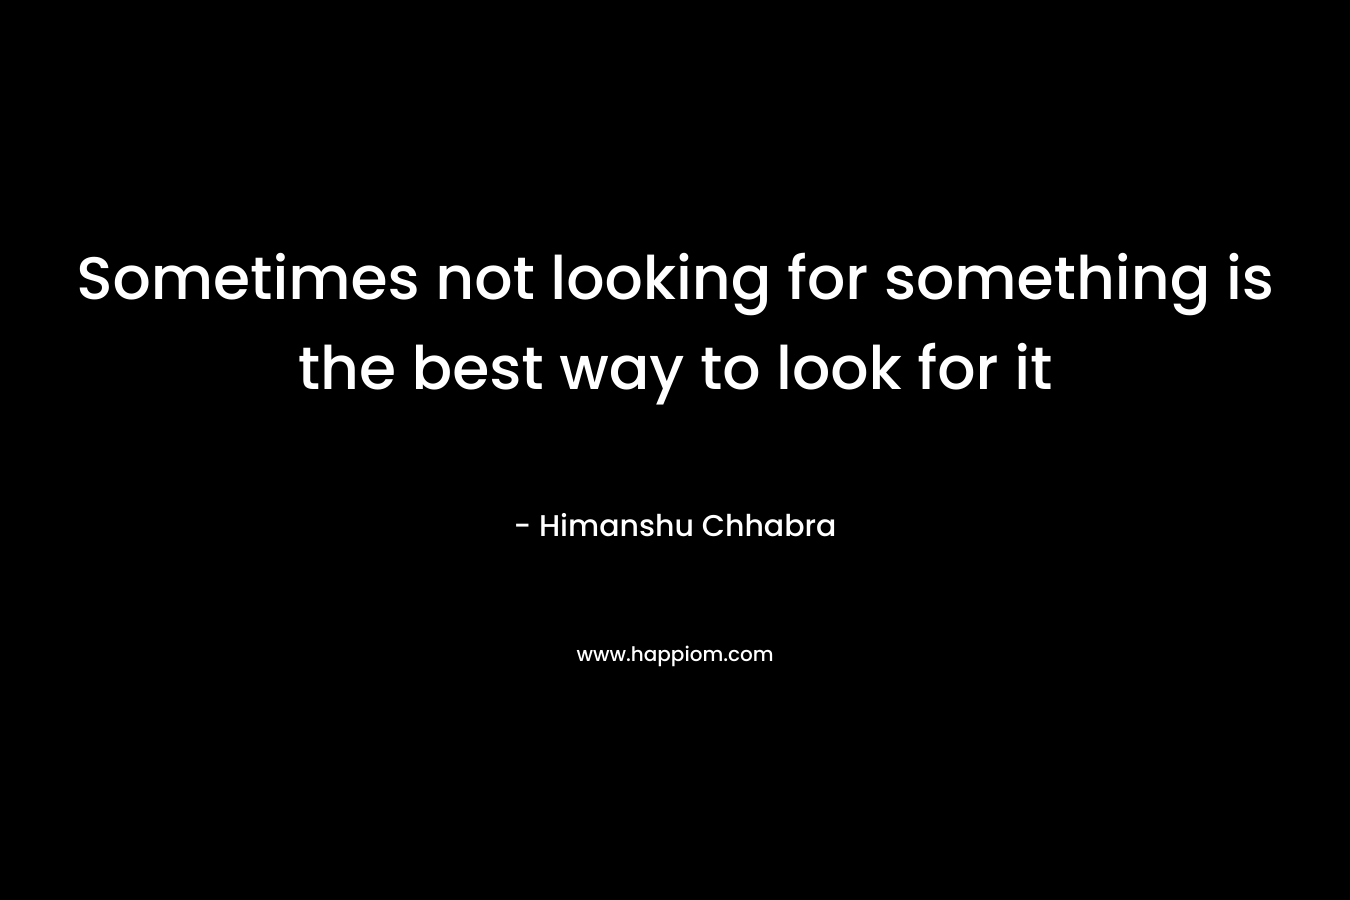 Sometimes not looking for something is the best way to look for it – Himanshu Chhabra